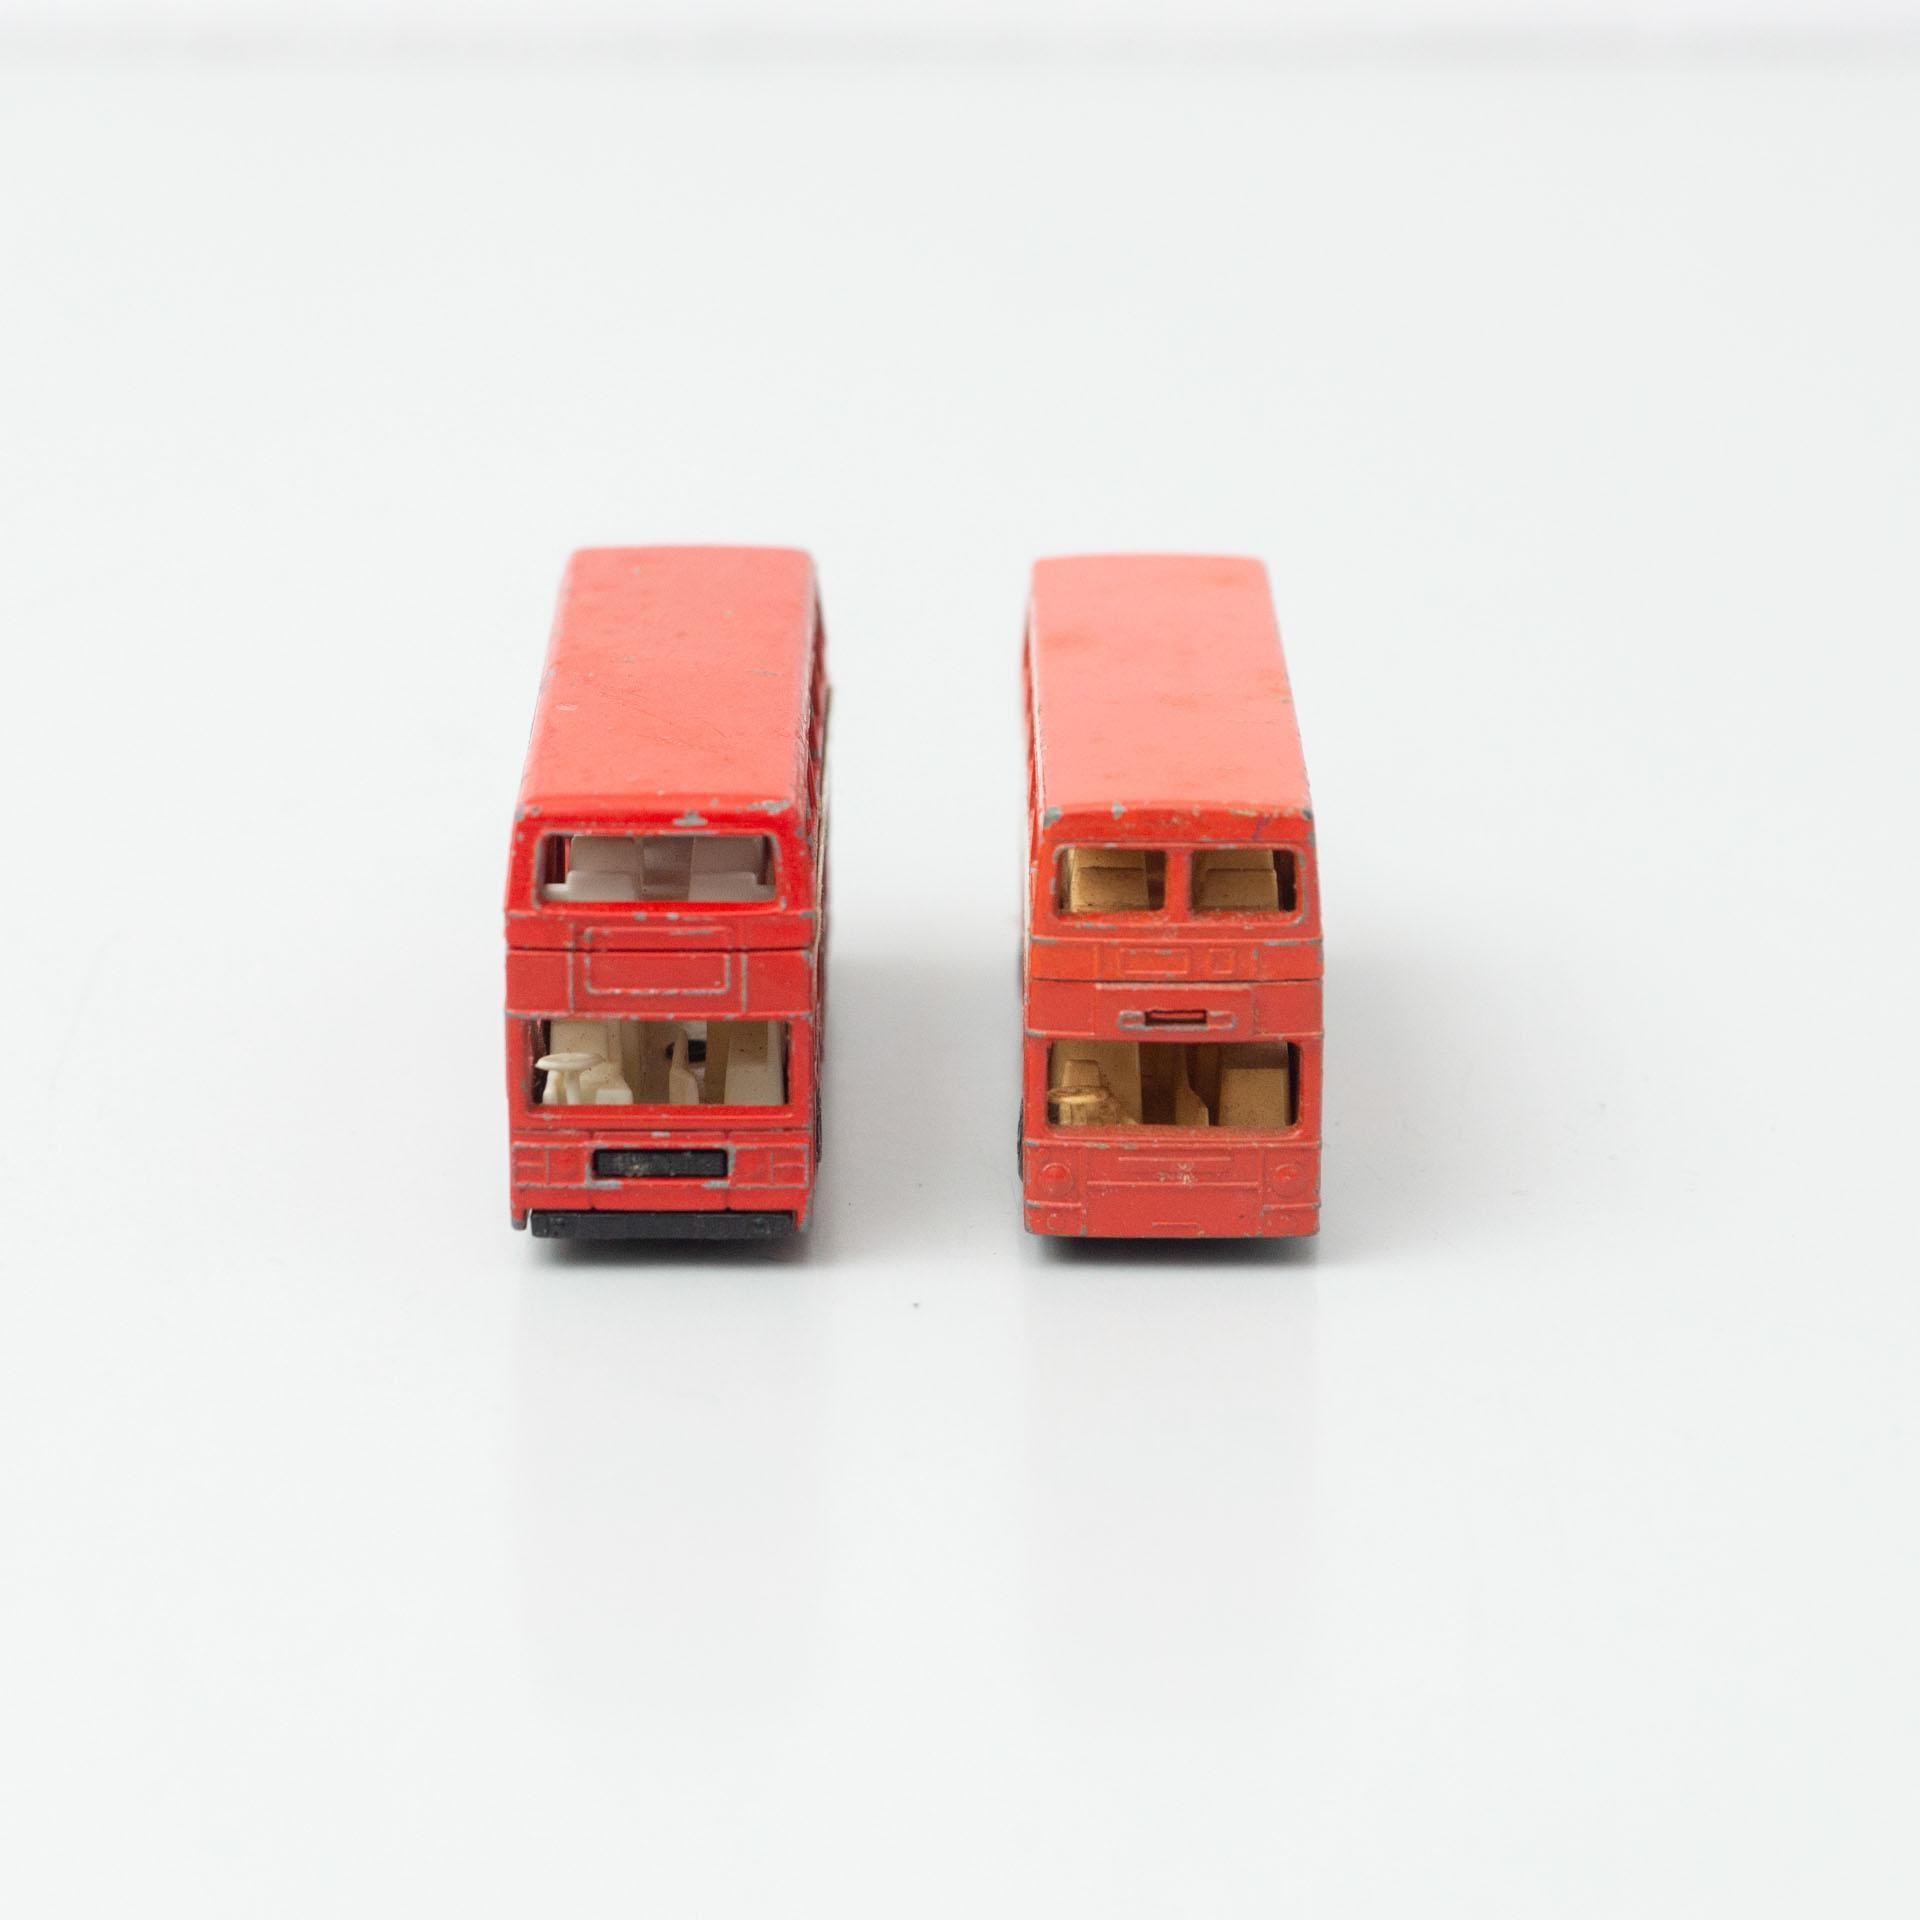 Set of two vintage London match box car bus toys.
By unknown manufacturer, circa 1960.

In original condition, with minor wear consistent with age and use, preserving a beautiful patina.

Materials:
Metal
Plastic

Dimensions (each one):
D